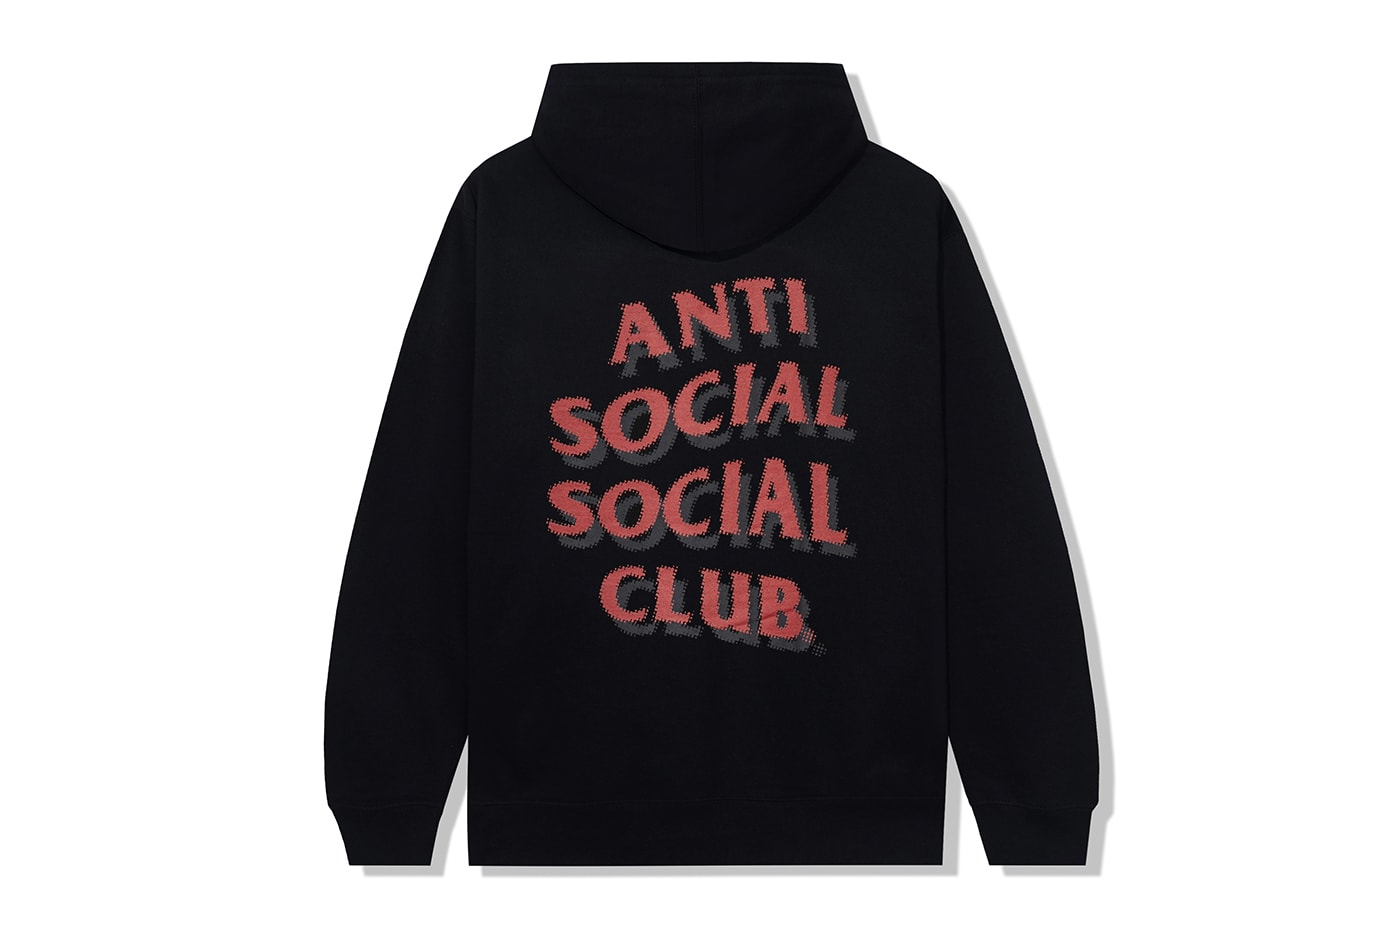 ANTI SOCIAL SOCIAL CLUB Fall 2022 IMPATIENT Collection Full Look Release Info Date Buy Price 